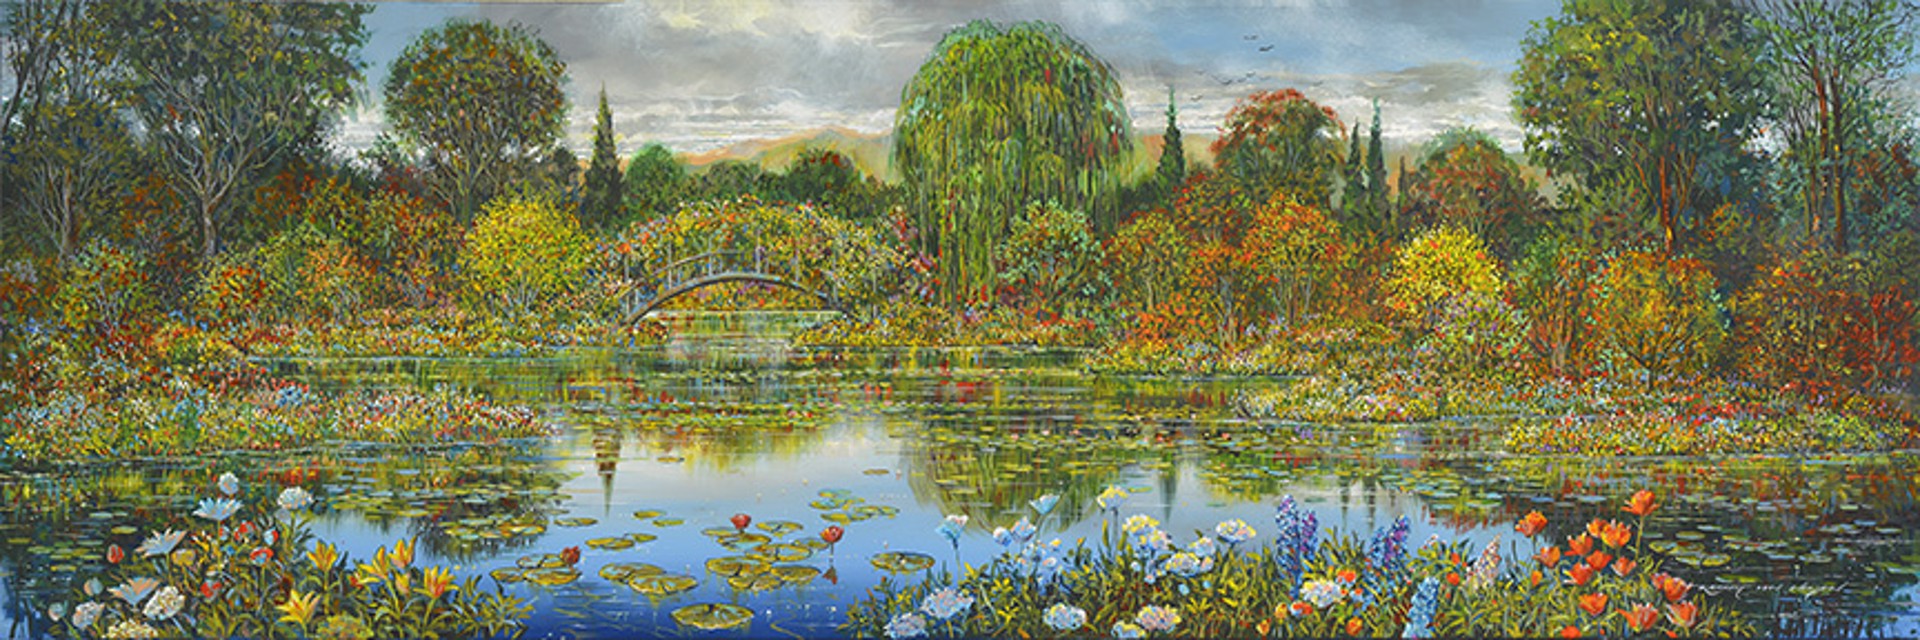 Autumn Giverny  by Robert Lyn Nelson